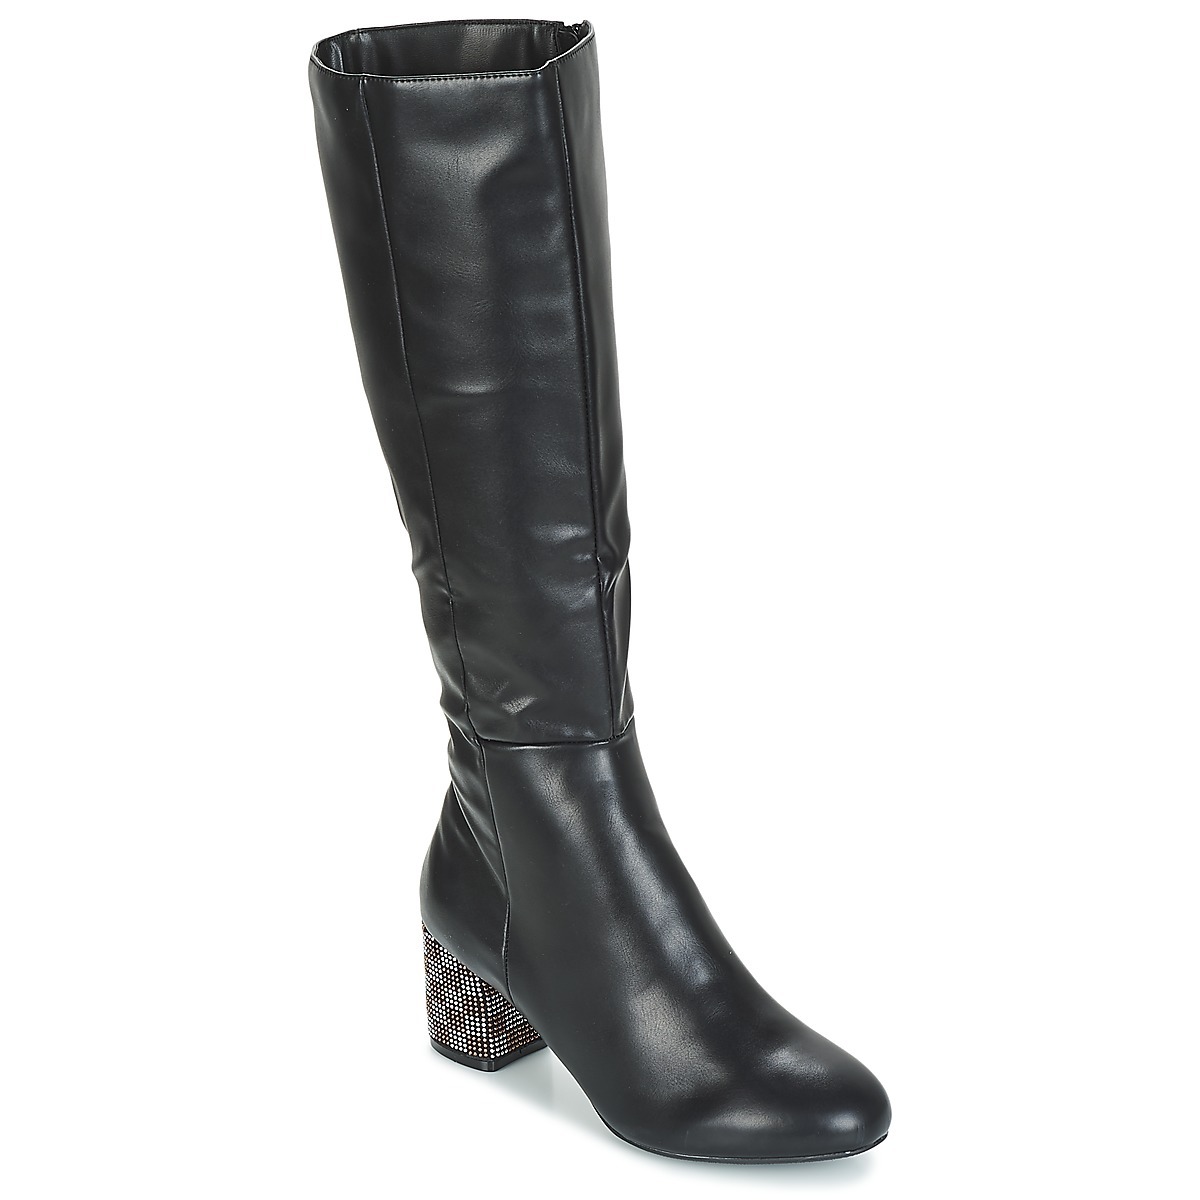 Moony Mood - Boots Black for Woman from Spartoo GOOFASH